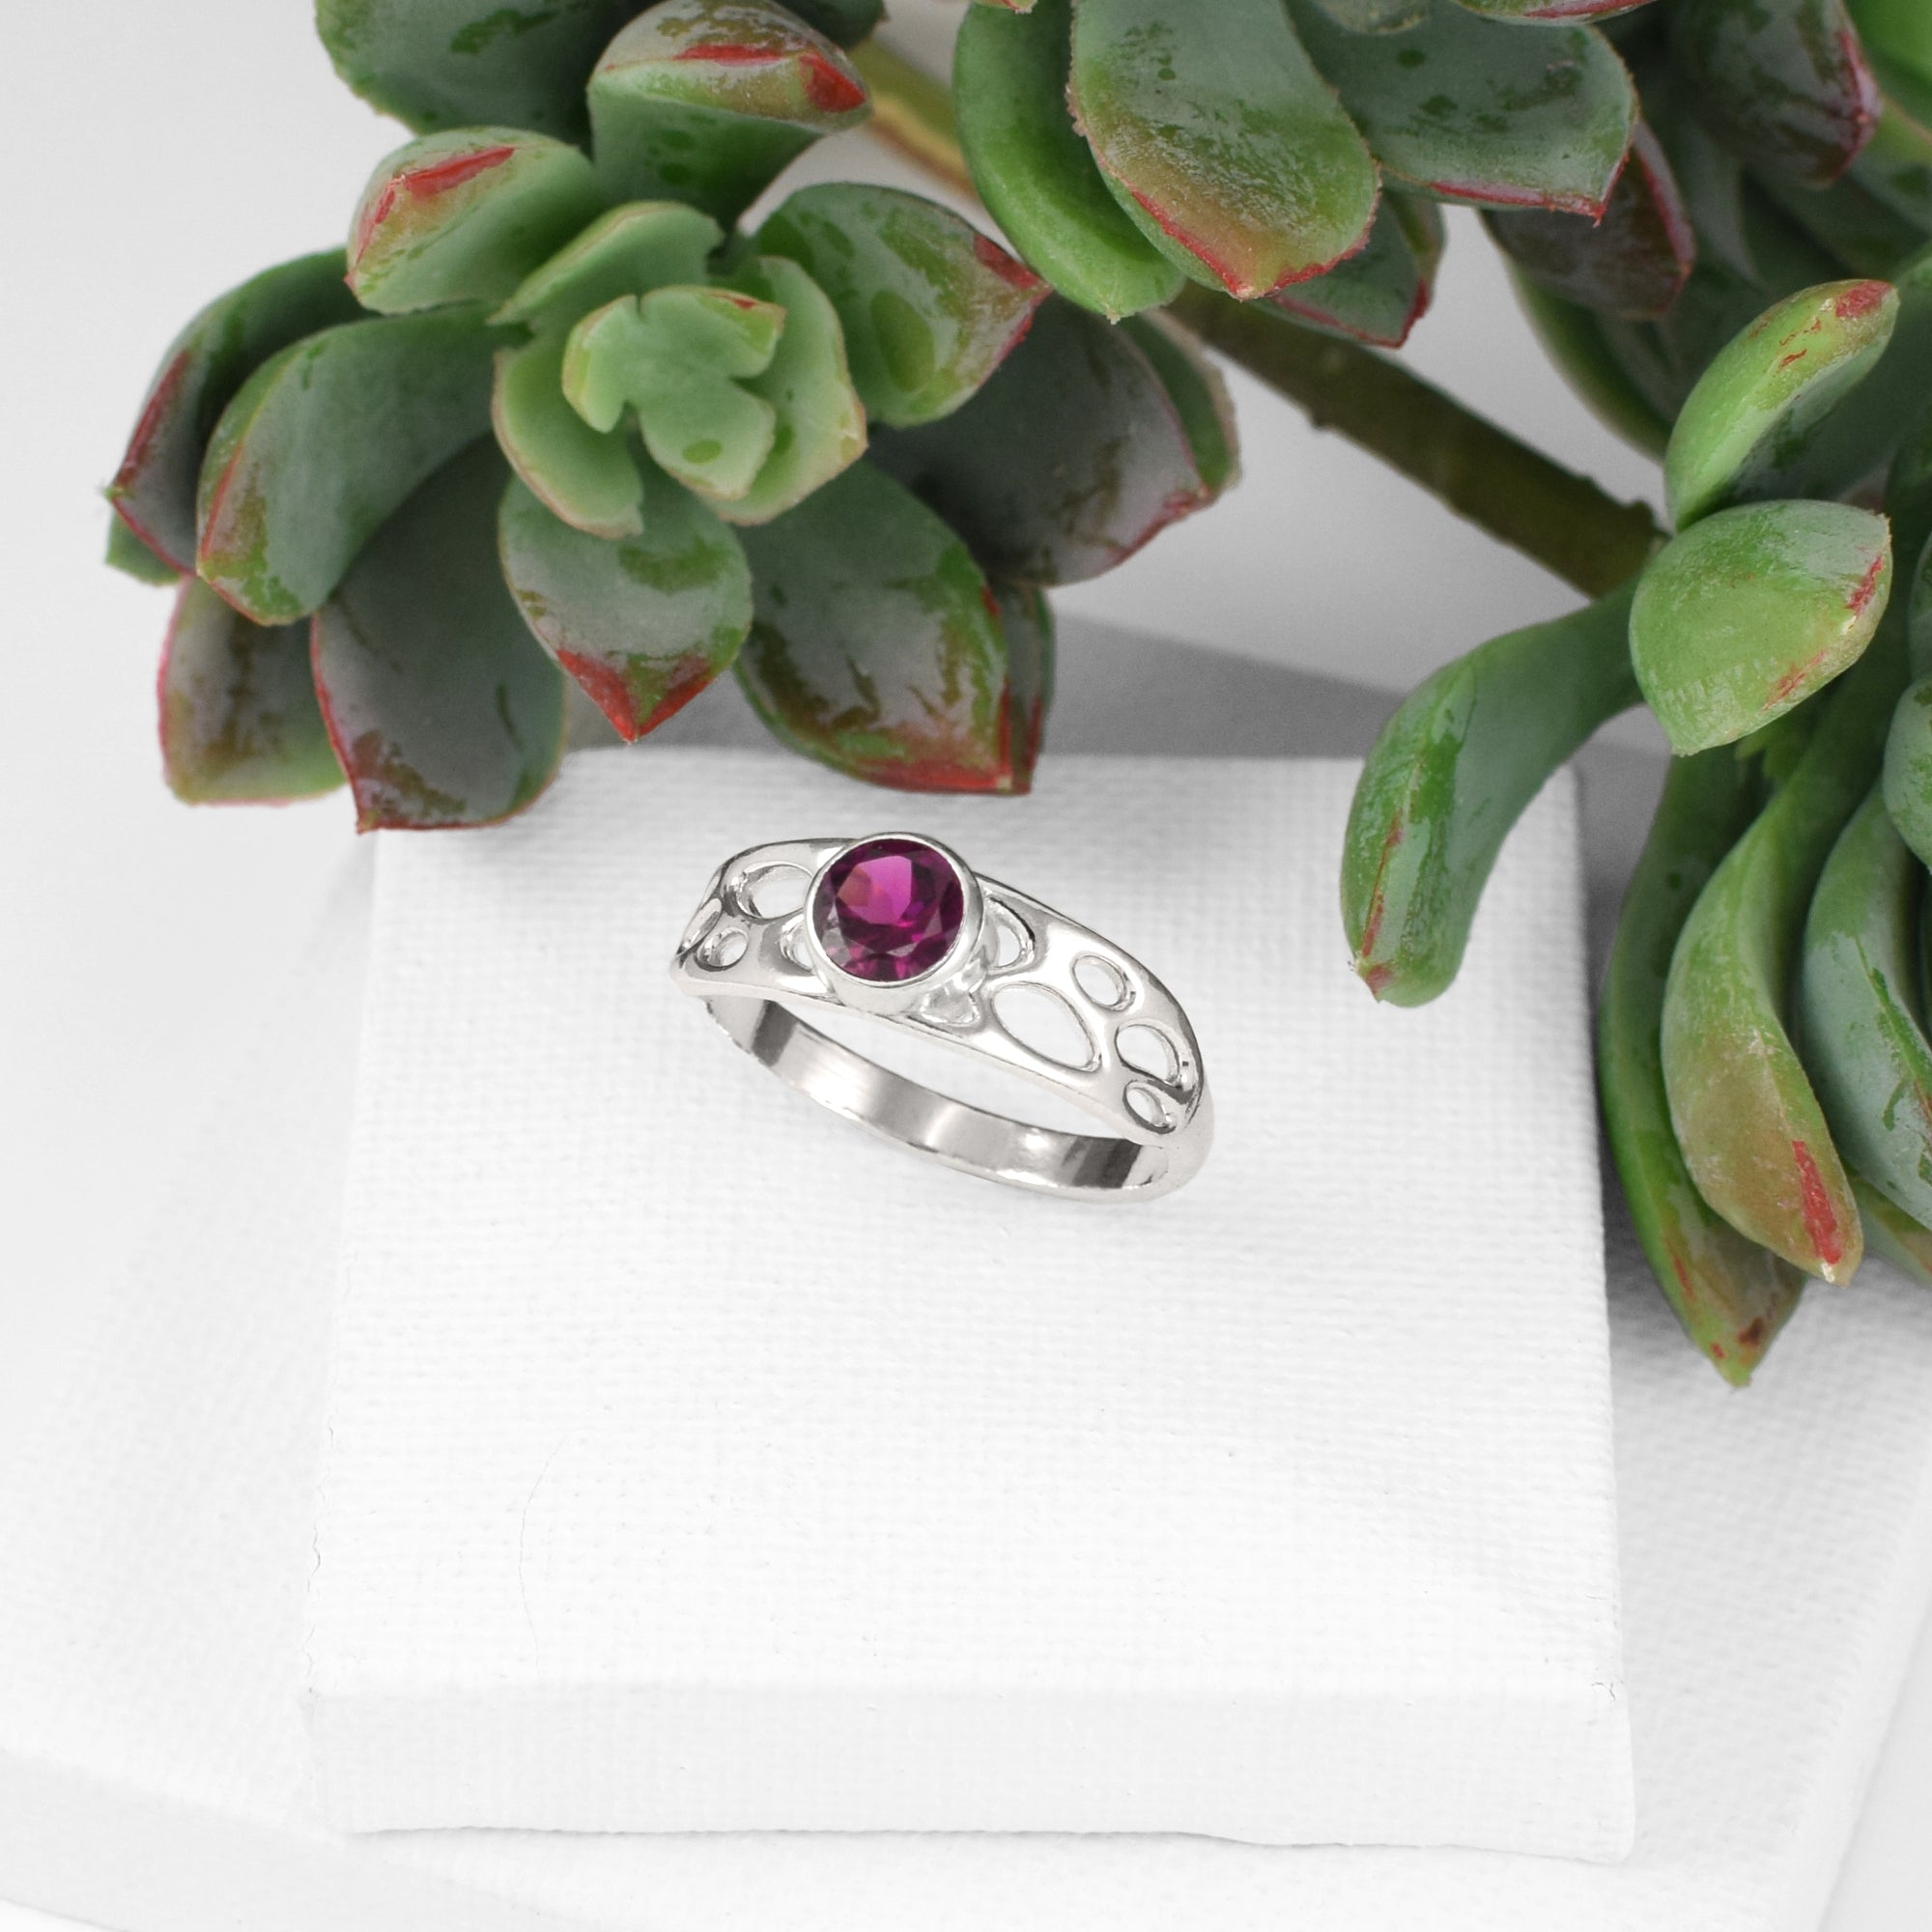 botanical solitaire ring with garnet on white background with plant